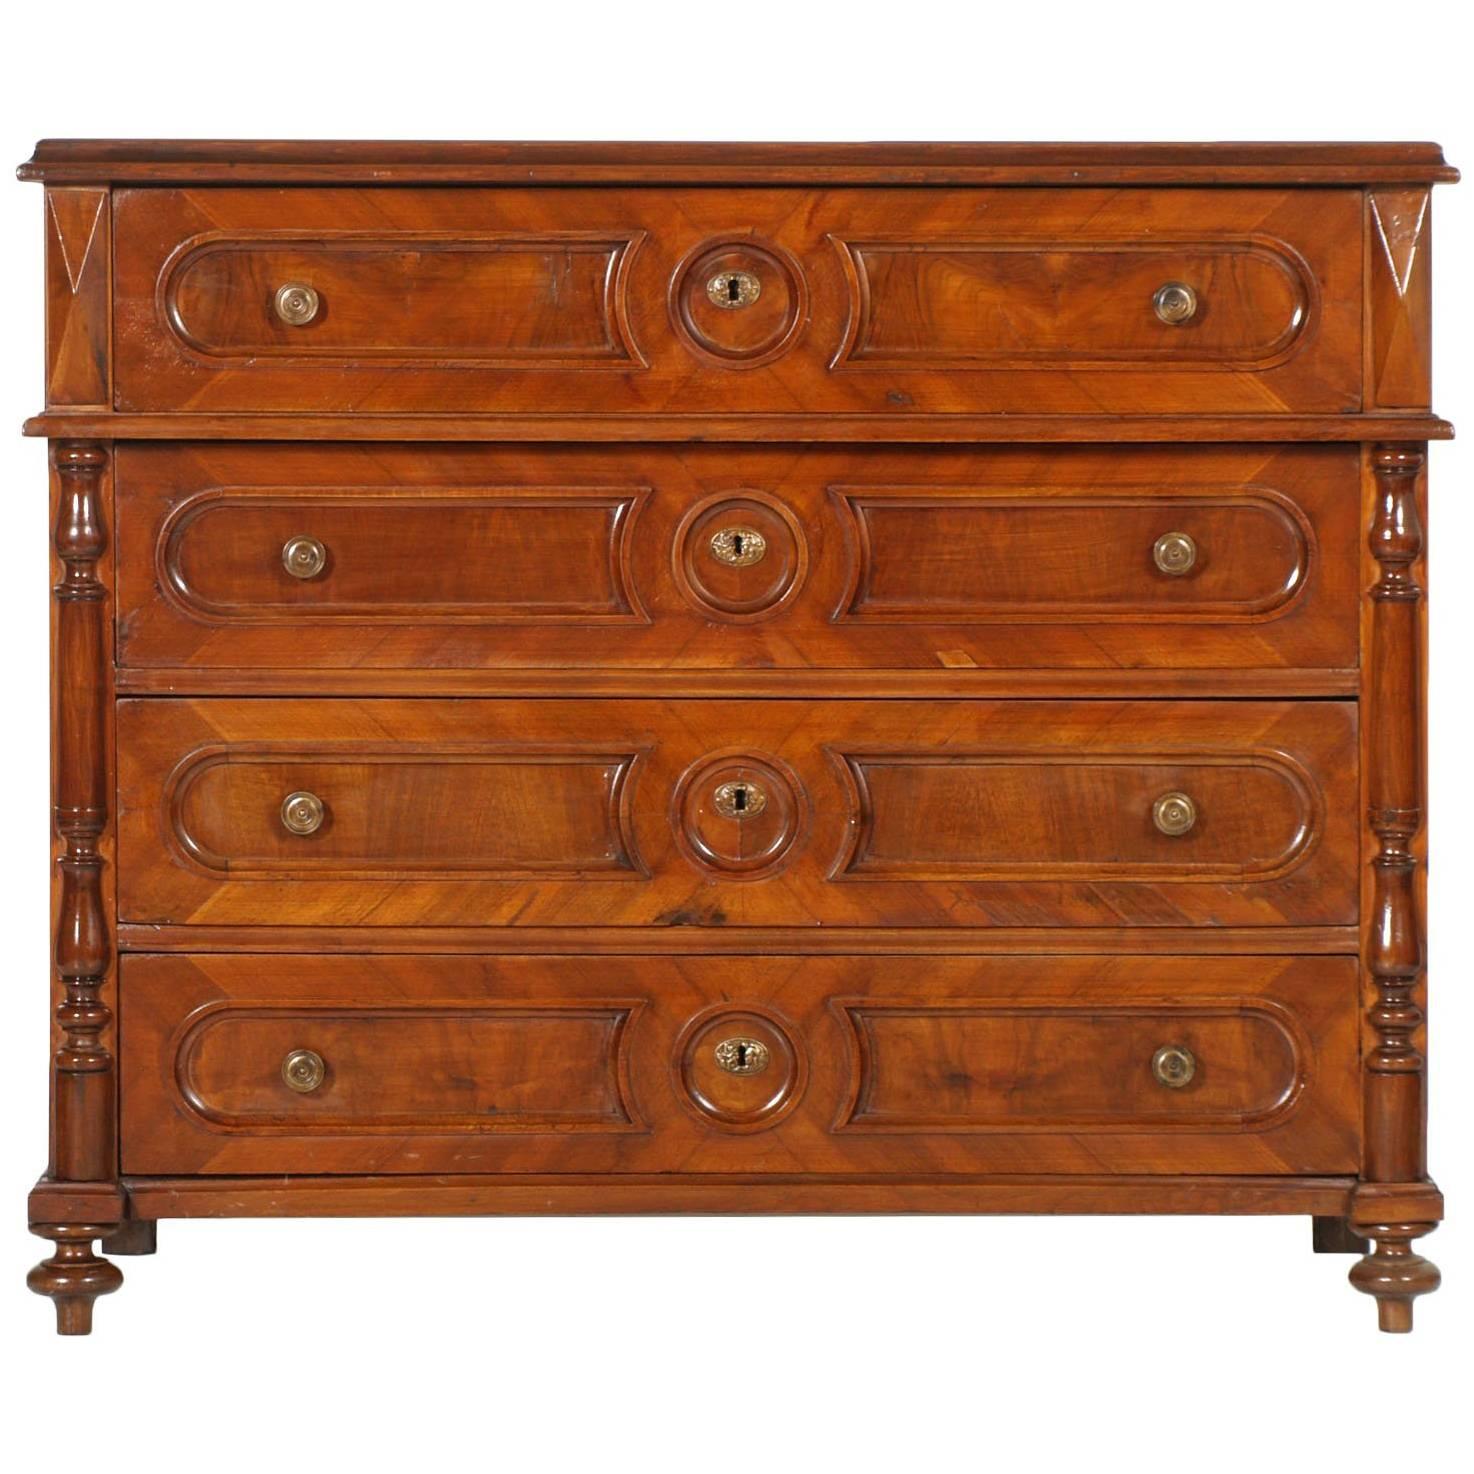 Mid 19th C. Italian Commode in blond Walnut and Walnut veneer, Polished to Wax For Sale